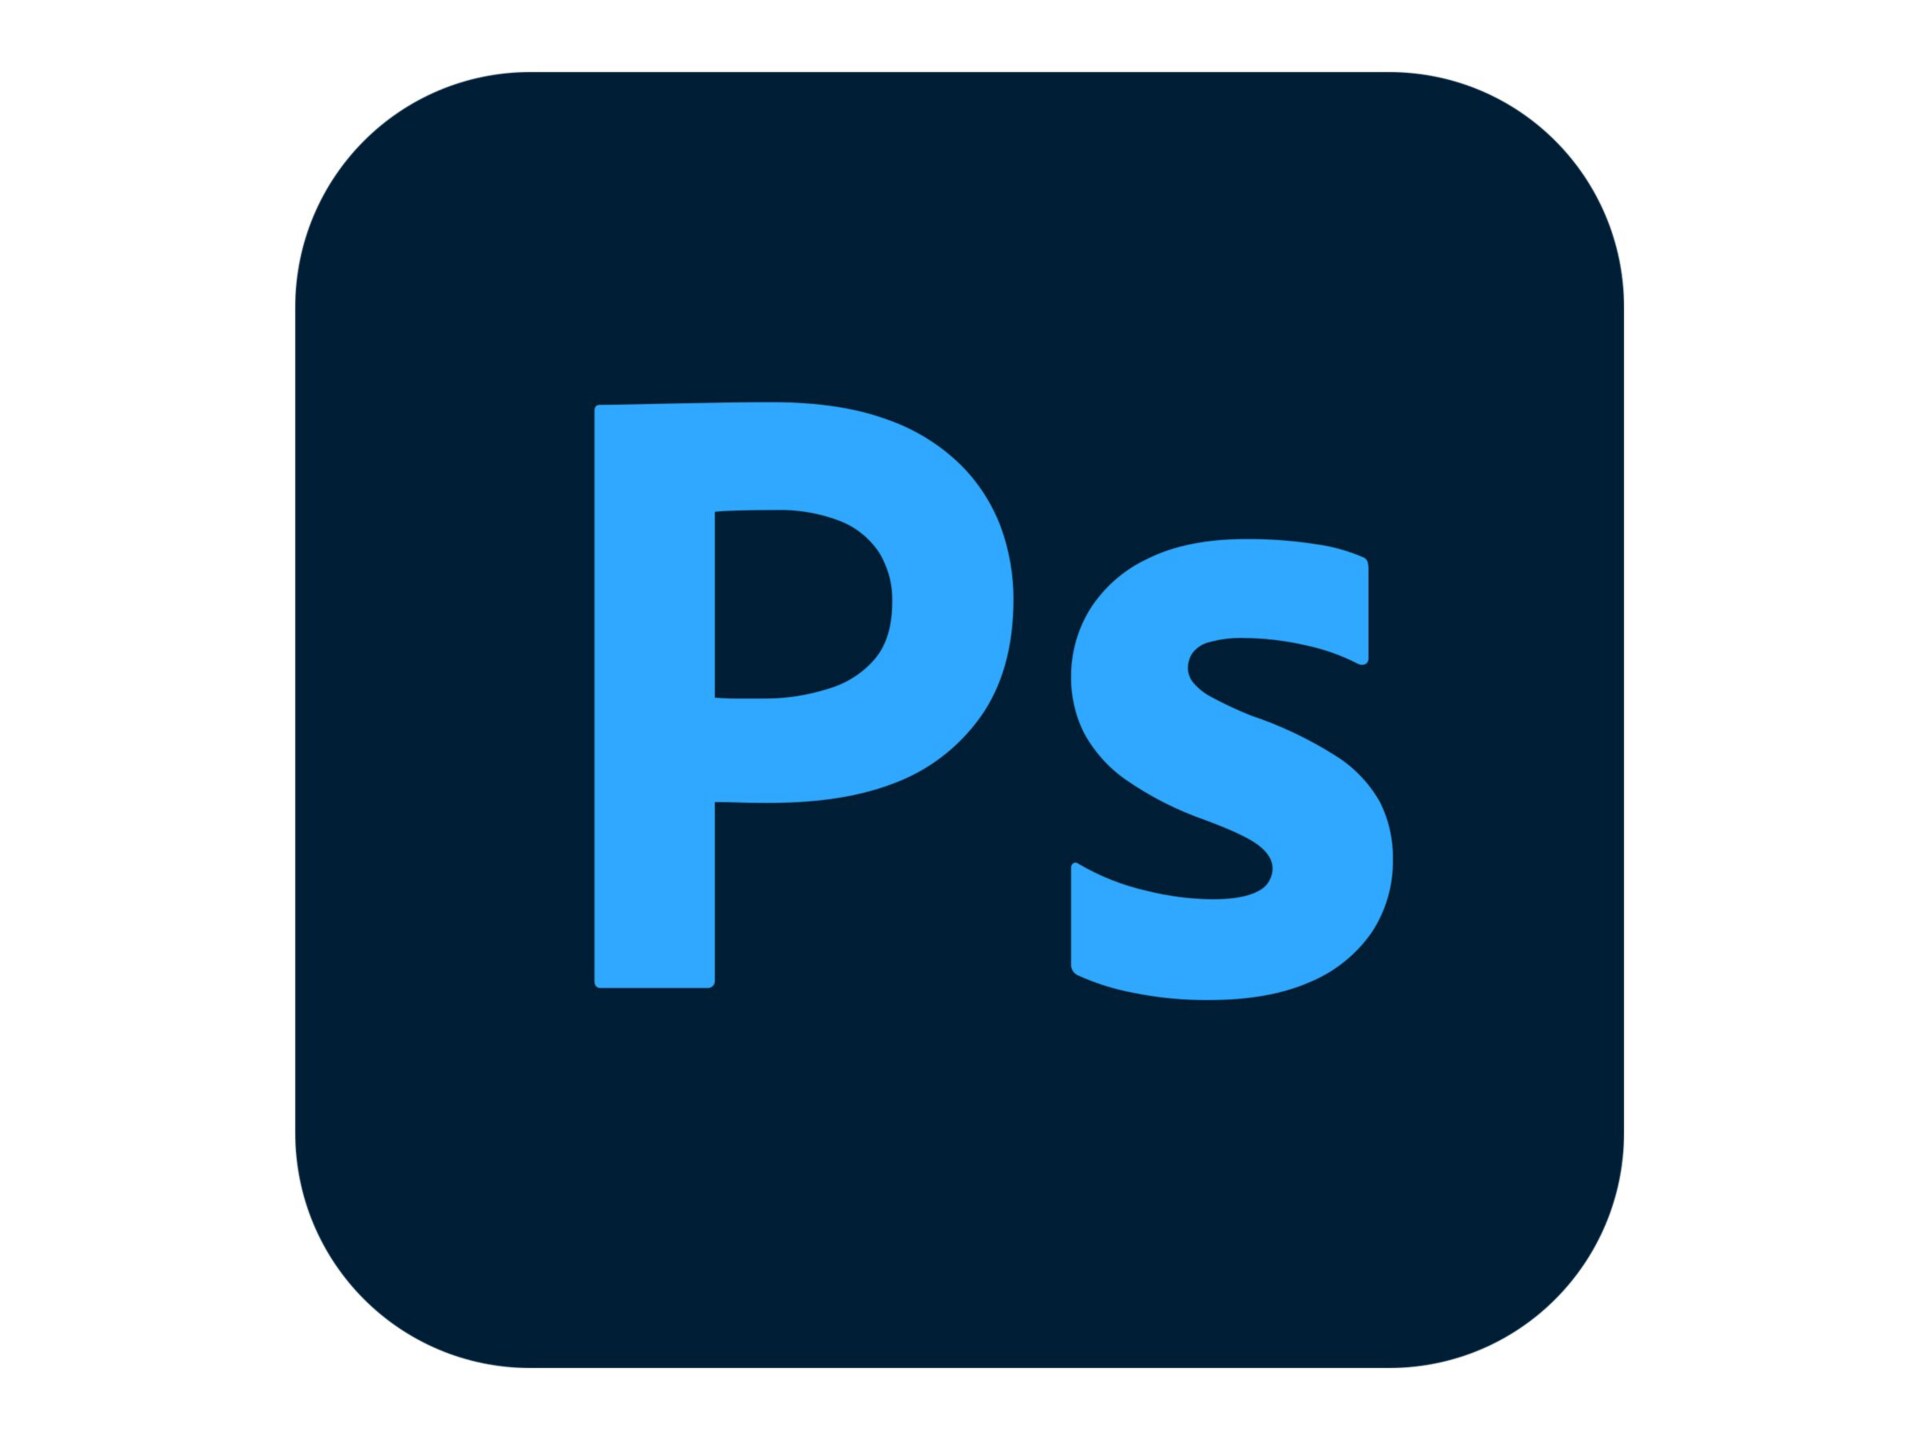 Adobe Photoshop CC for teams - Subscription New (18 months) - 1 named user